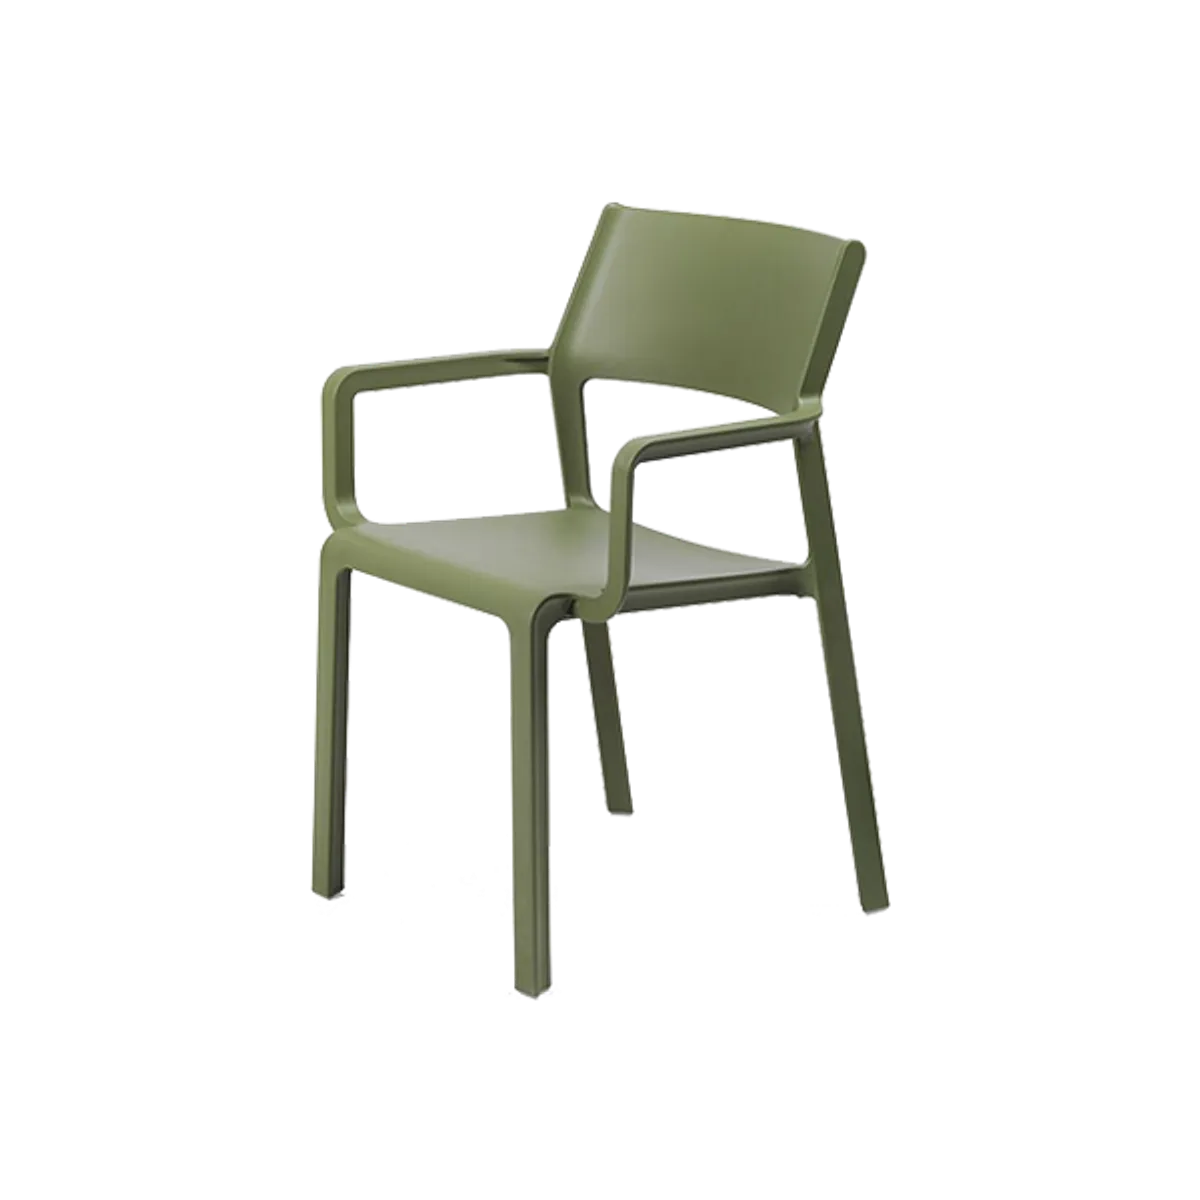 Web Trill Armchair Fibreglass Furniture For Exterior Commercial Use